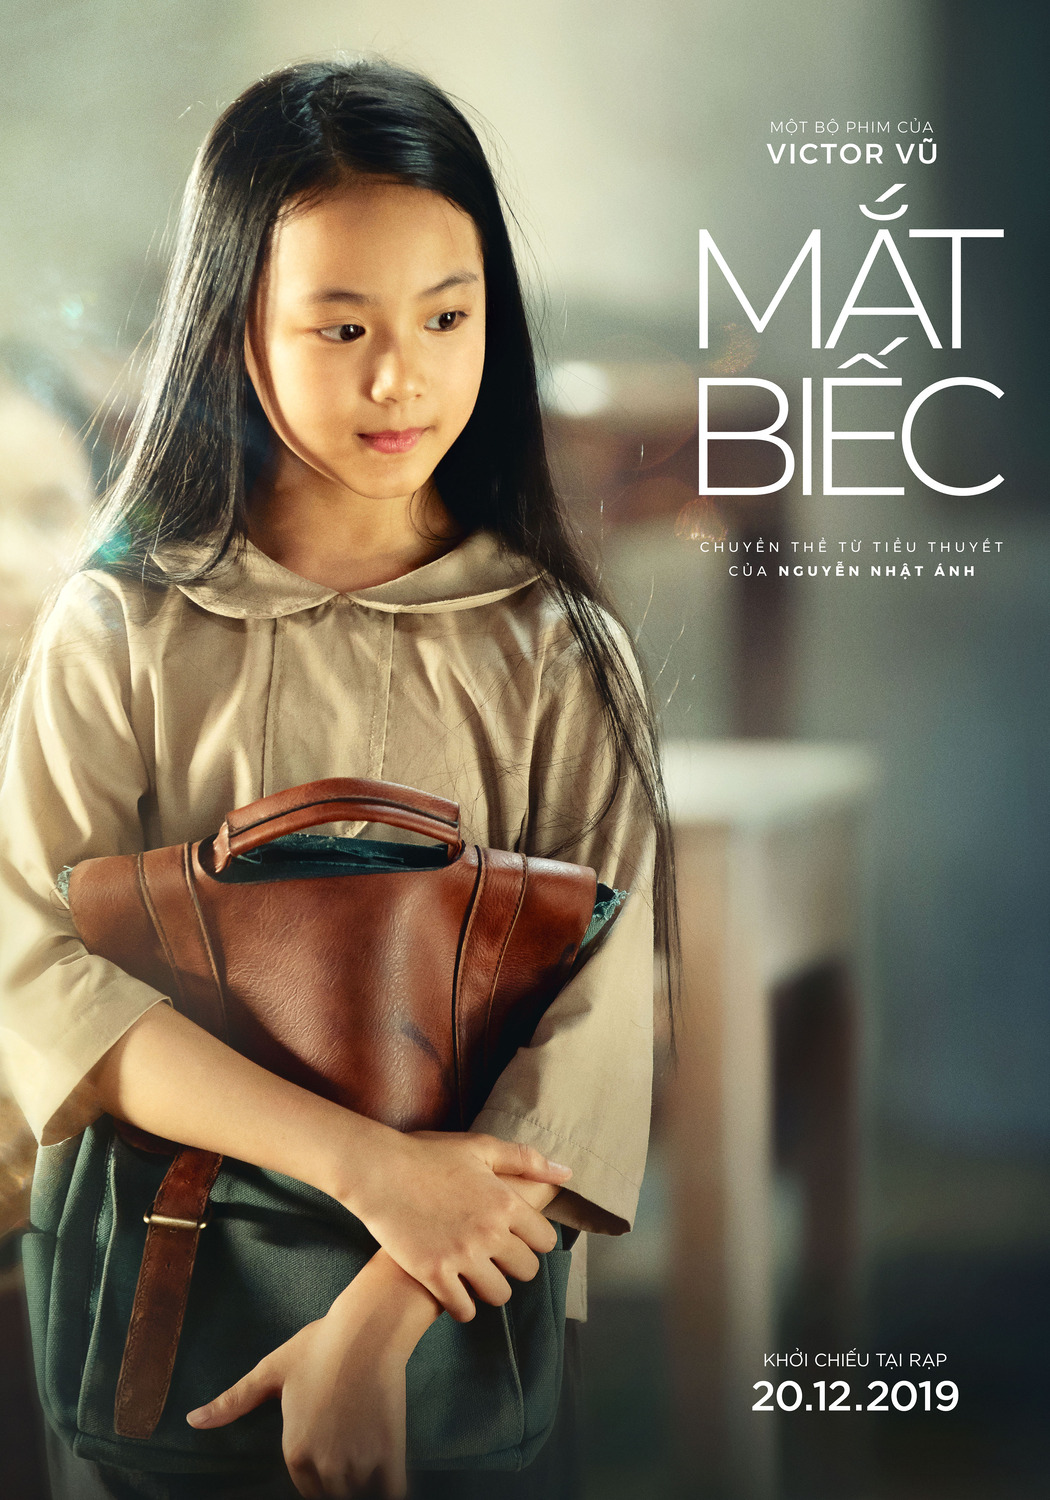 Extra Large Movie Poster Image for Mat biec (#6 of 15)